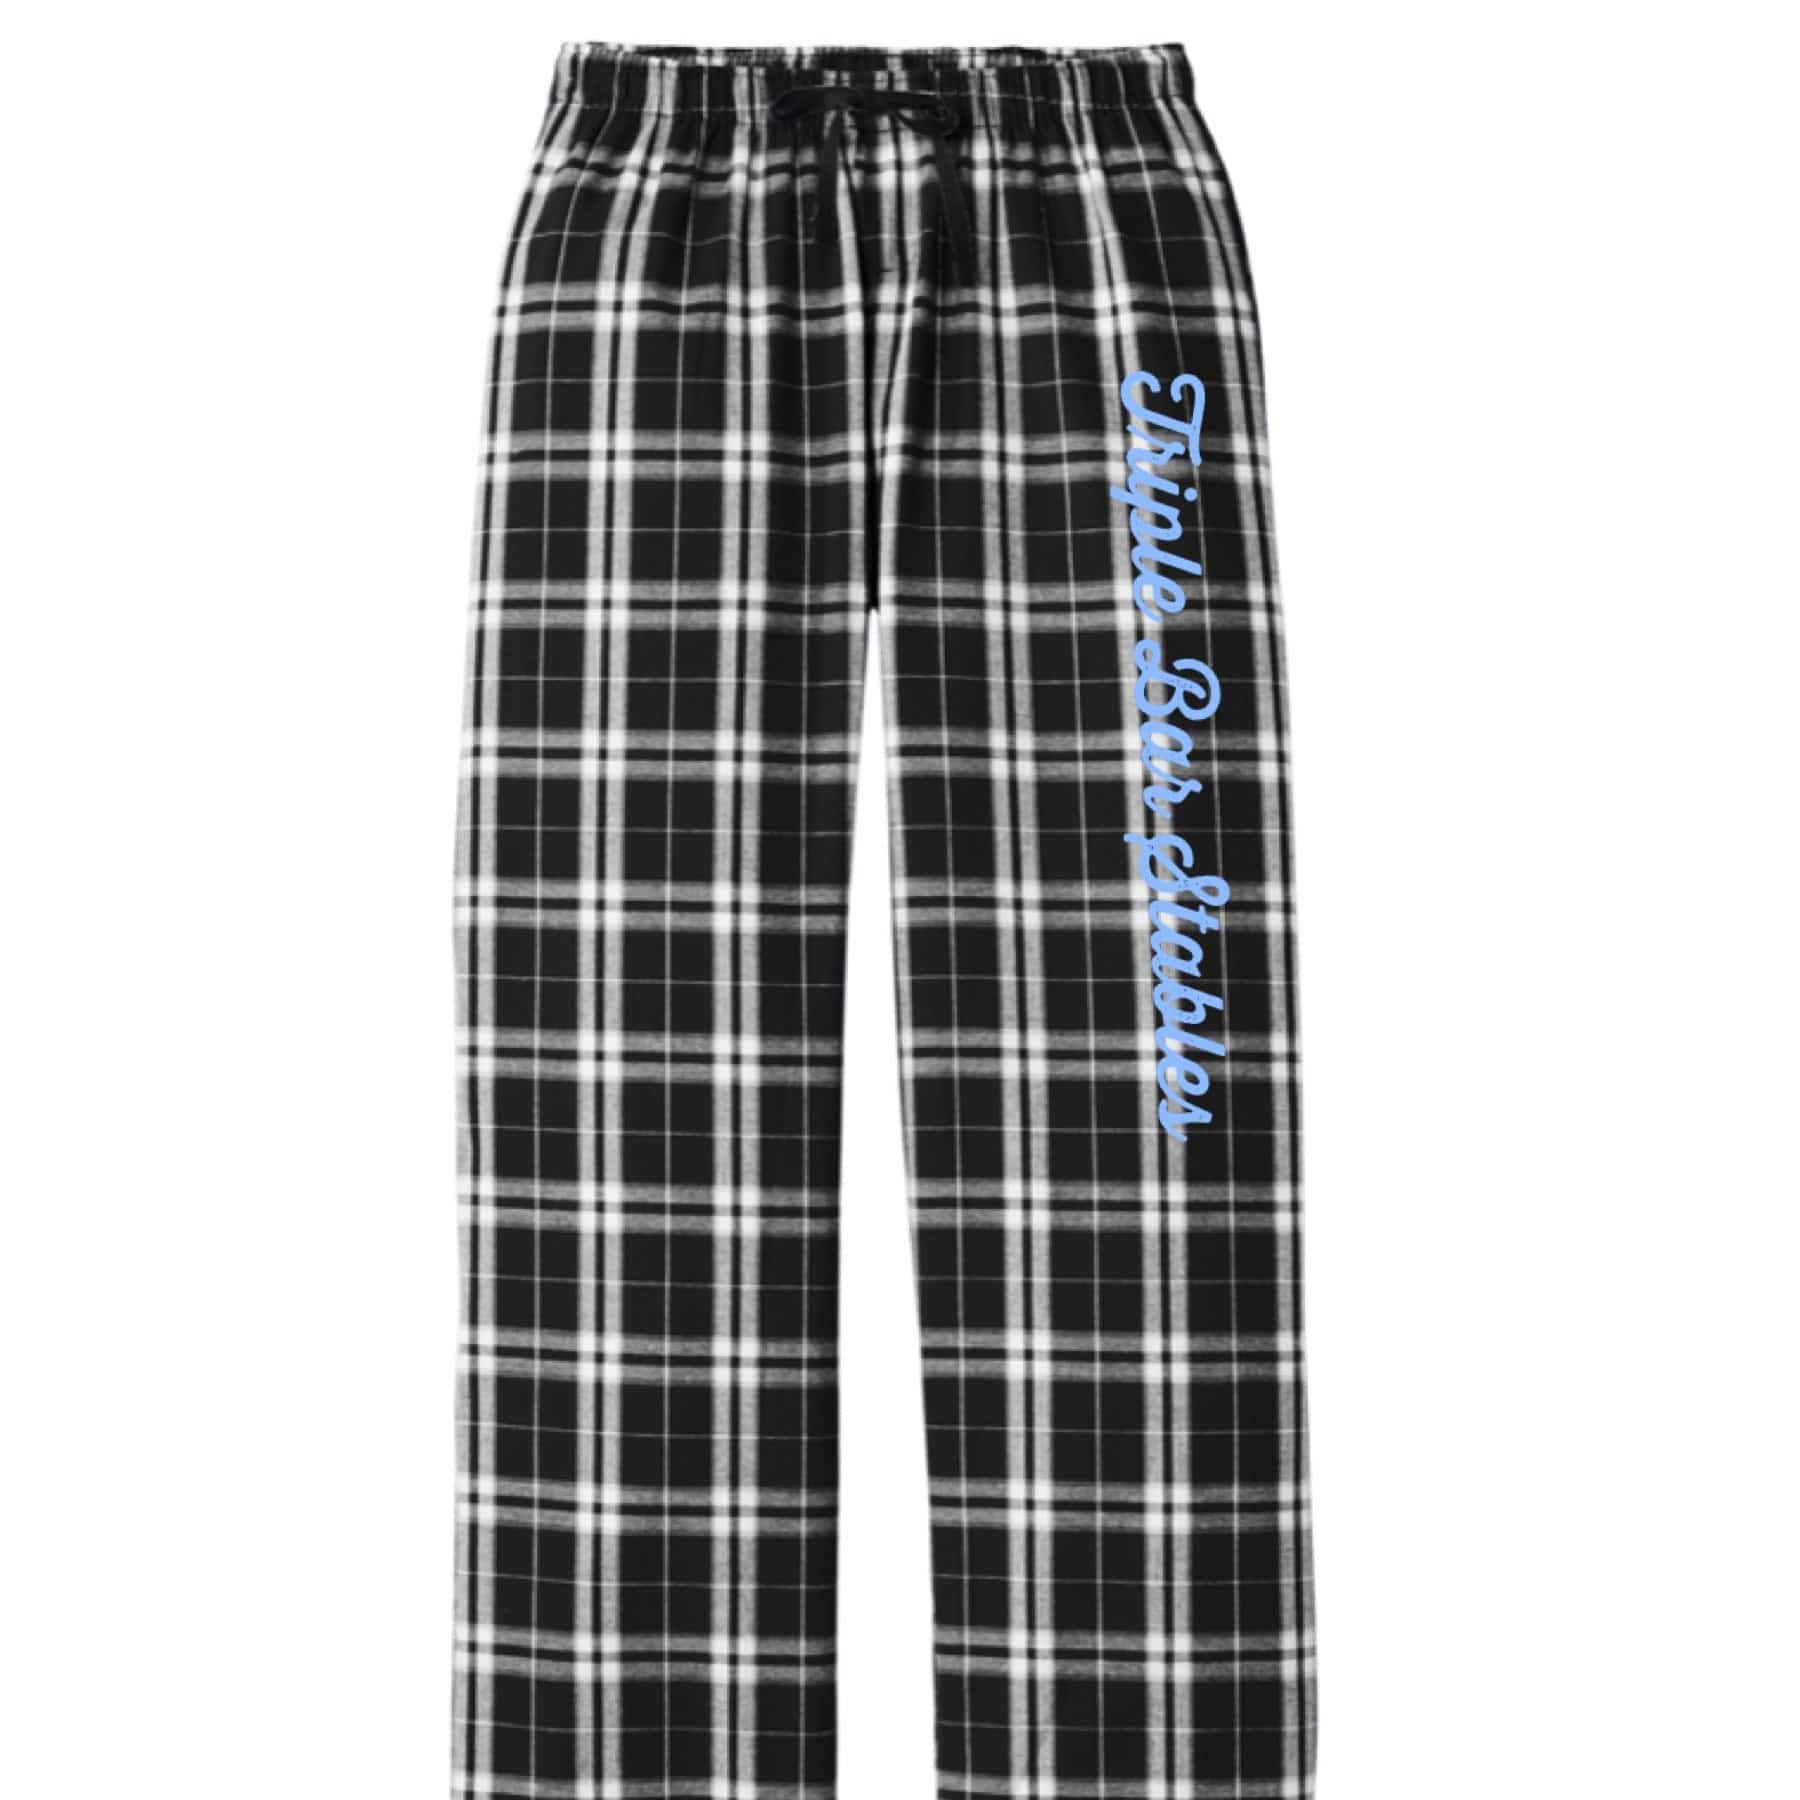 Equestrian Team Apparel Triple Bar Stables Flannel Pants equestrian team apparel online tack store mobile tack store custom farm apparel custom show stable clothing equestrian lifestyle horse show clothing riding clothes horses equestrian tack store